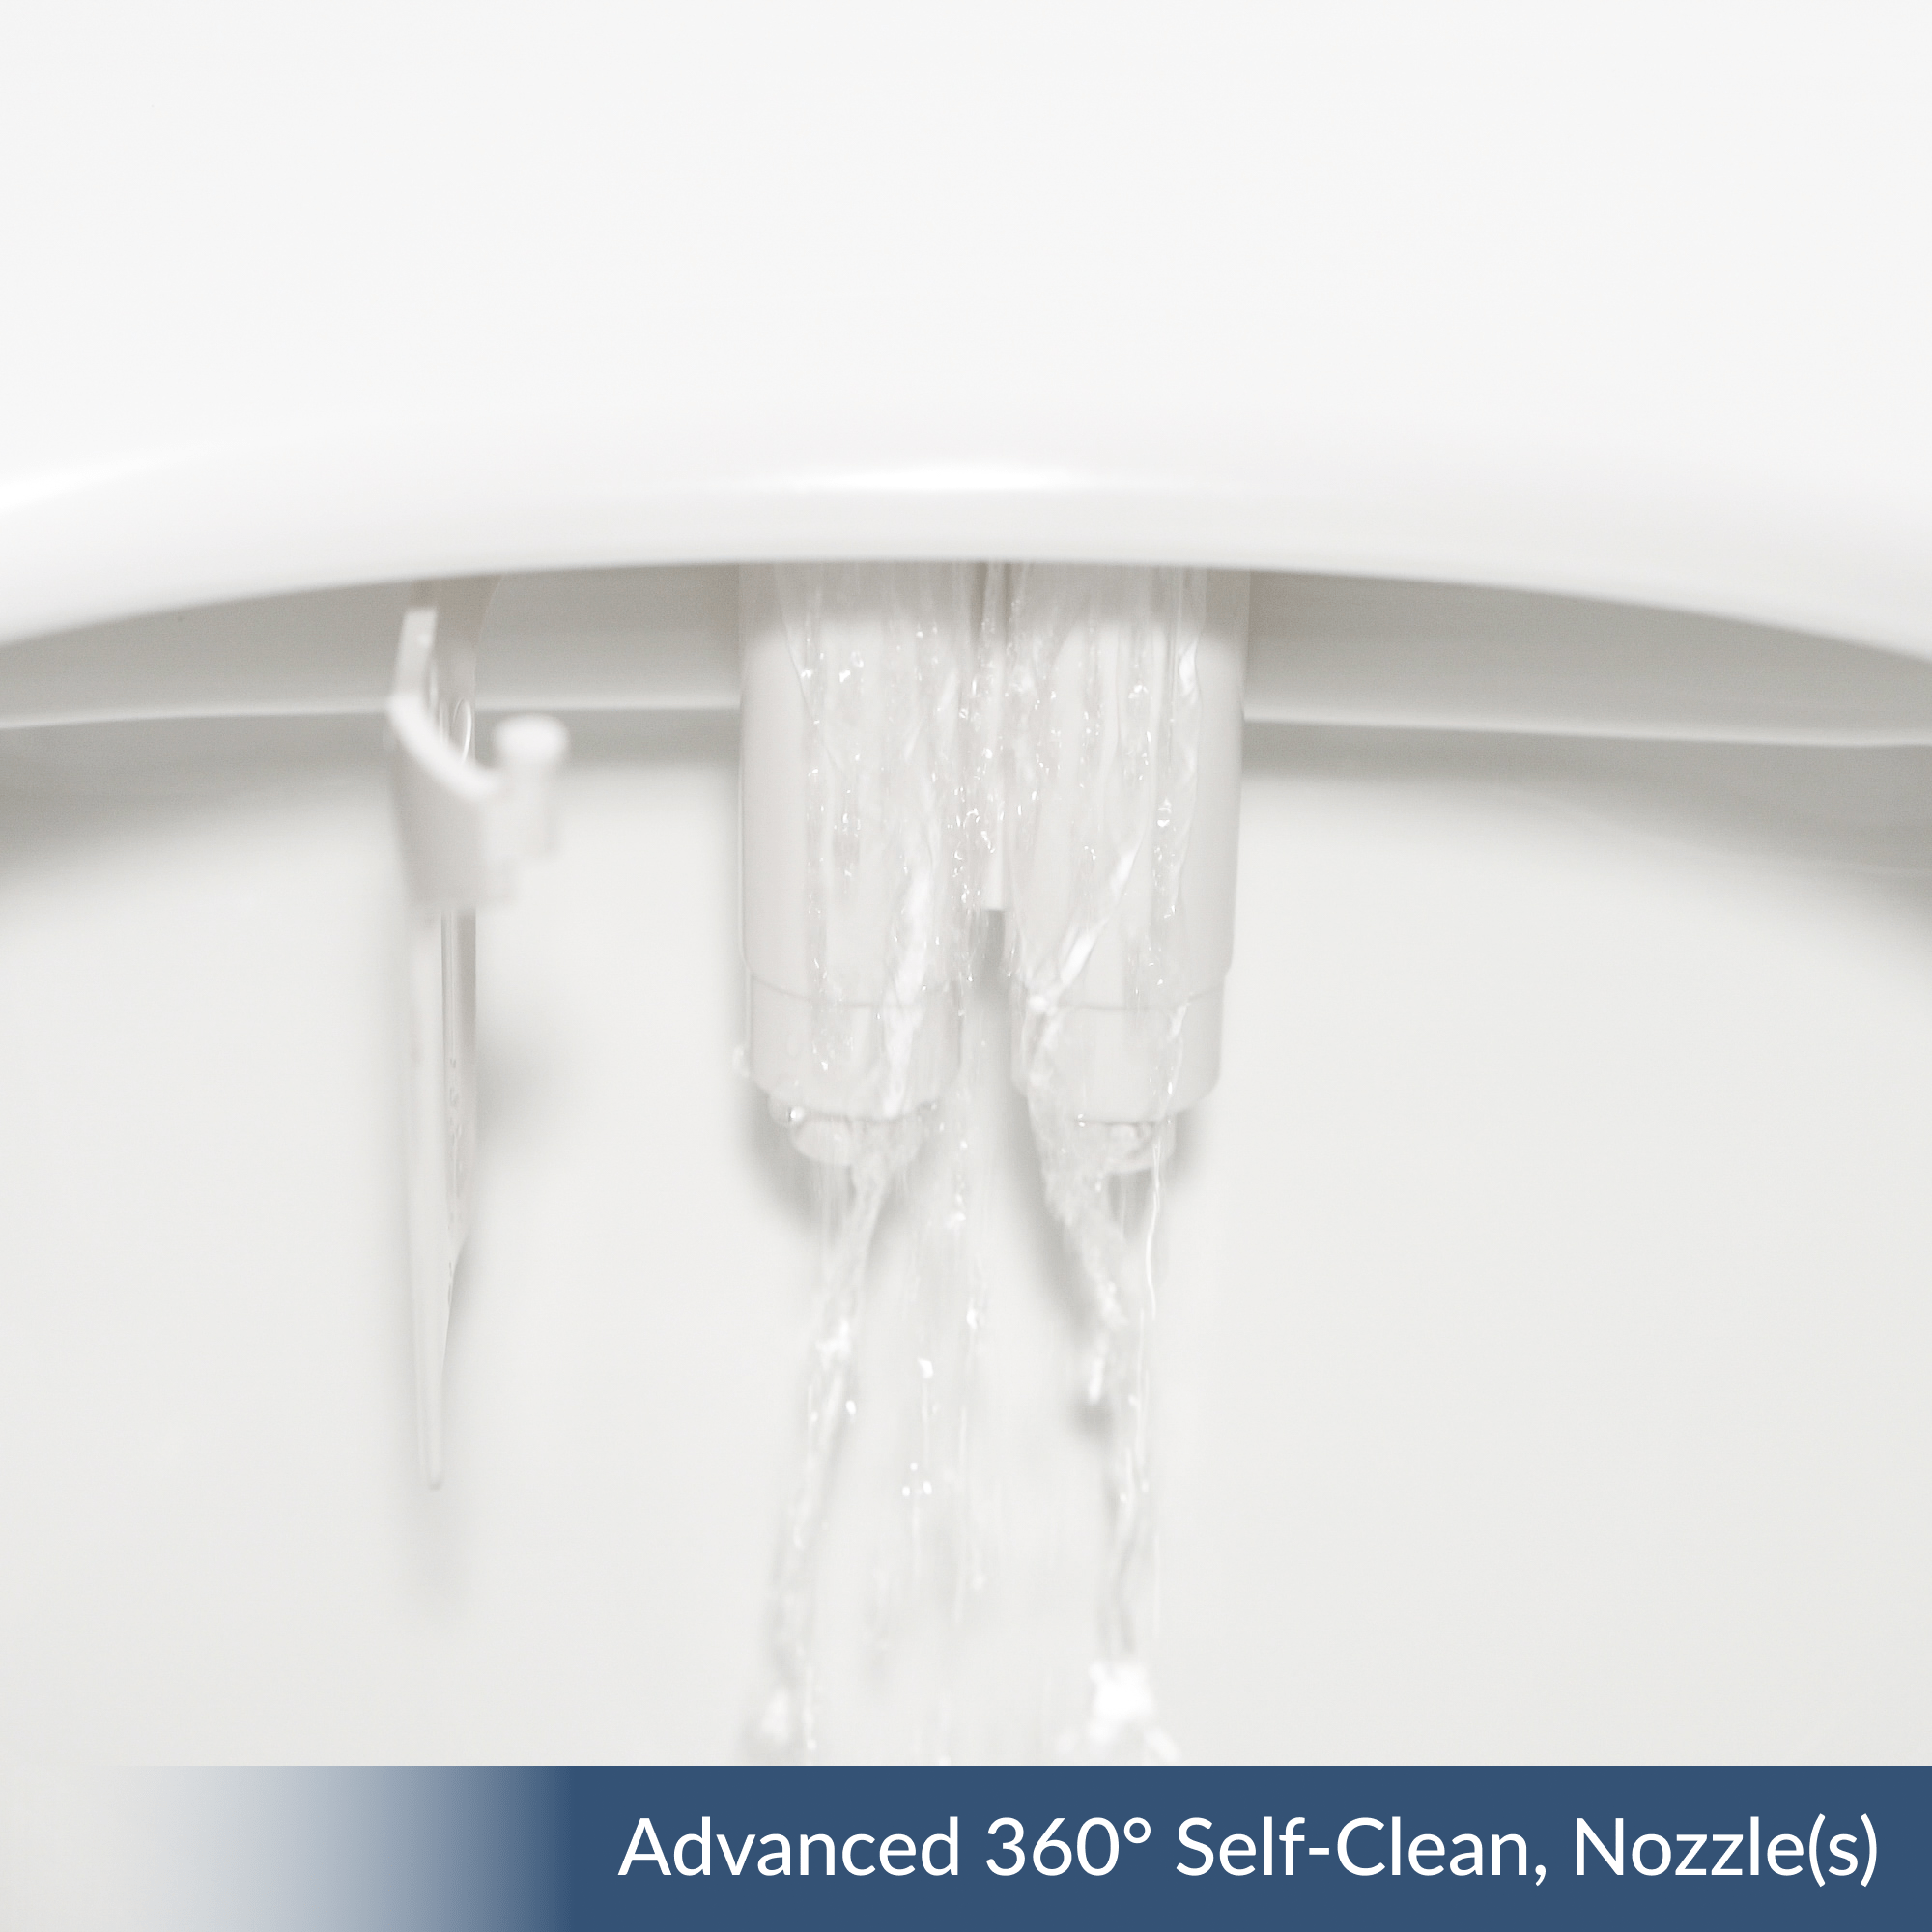 Advanced 360° Self-Clean feature of NEO Plus series running water down the nozzles to clean them